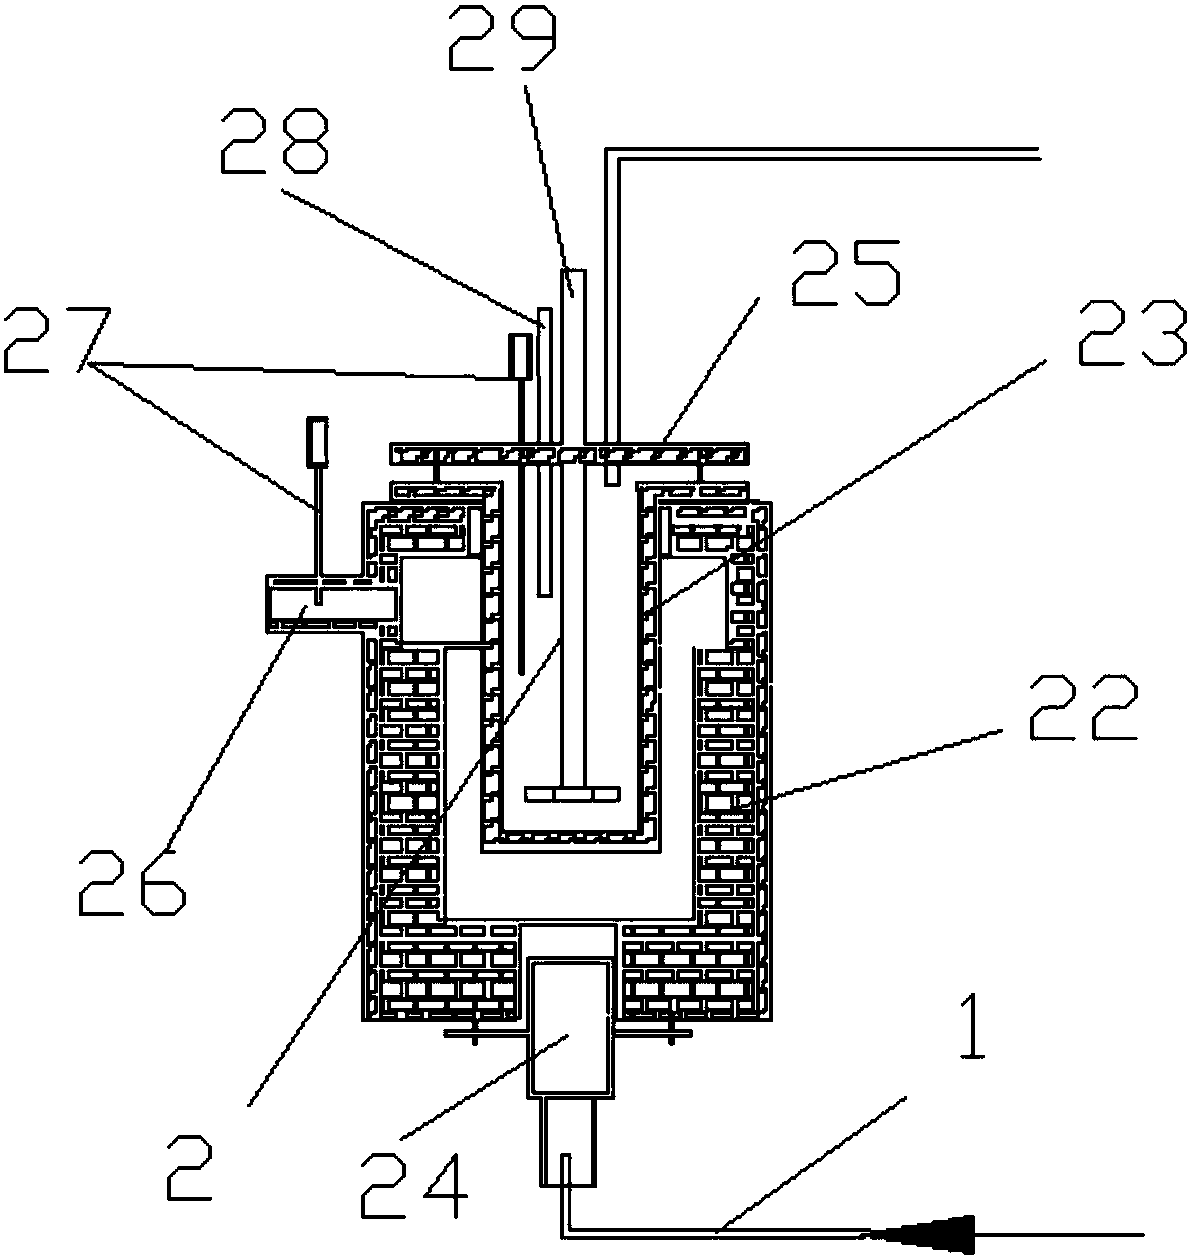 Pyrolysis reaction device applied to medical waste pyrolysis treatment system